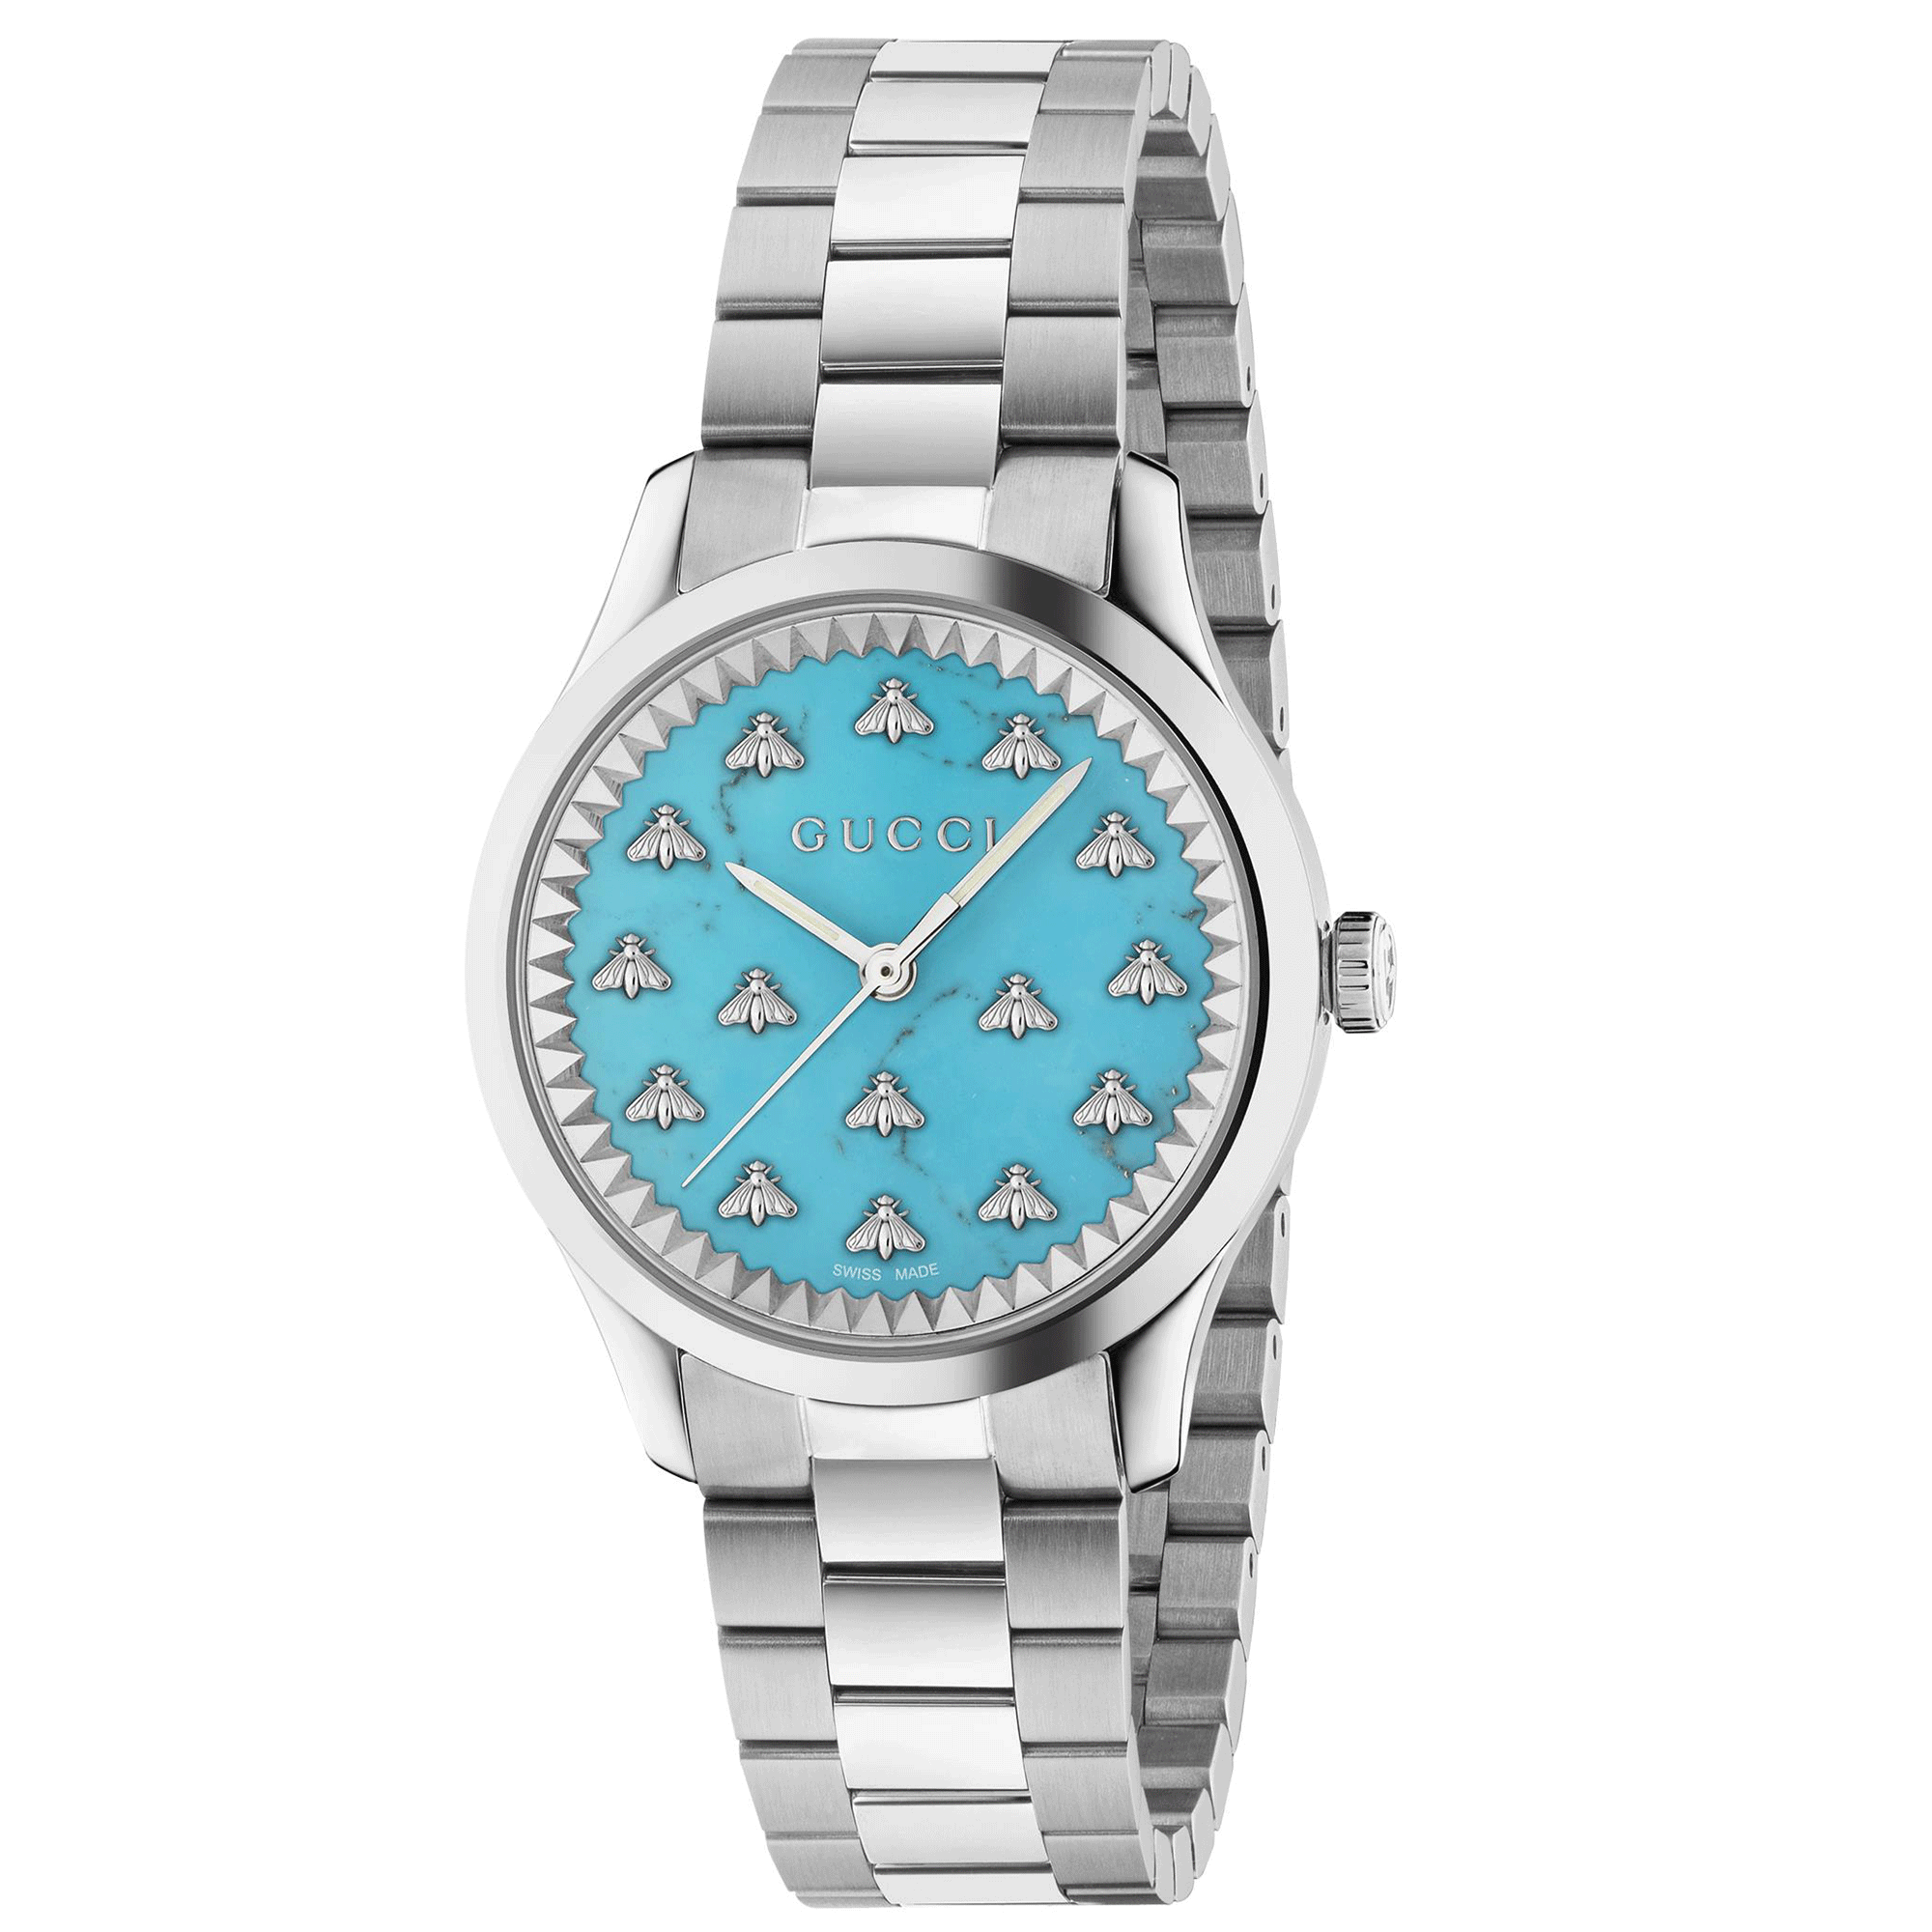 Gucci G-Timeless 32mm Quartz Steel Watch With A Turquoise Dial.